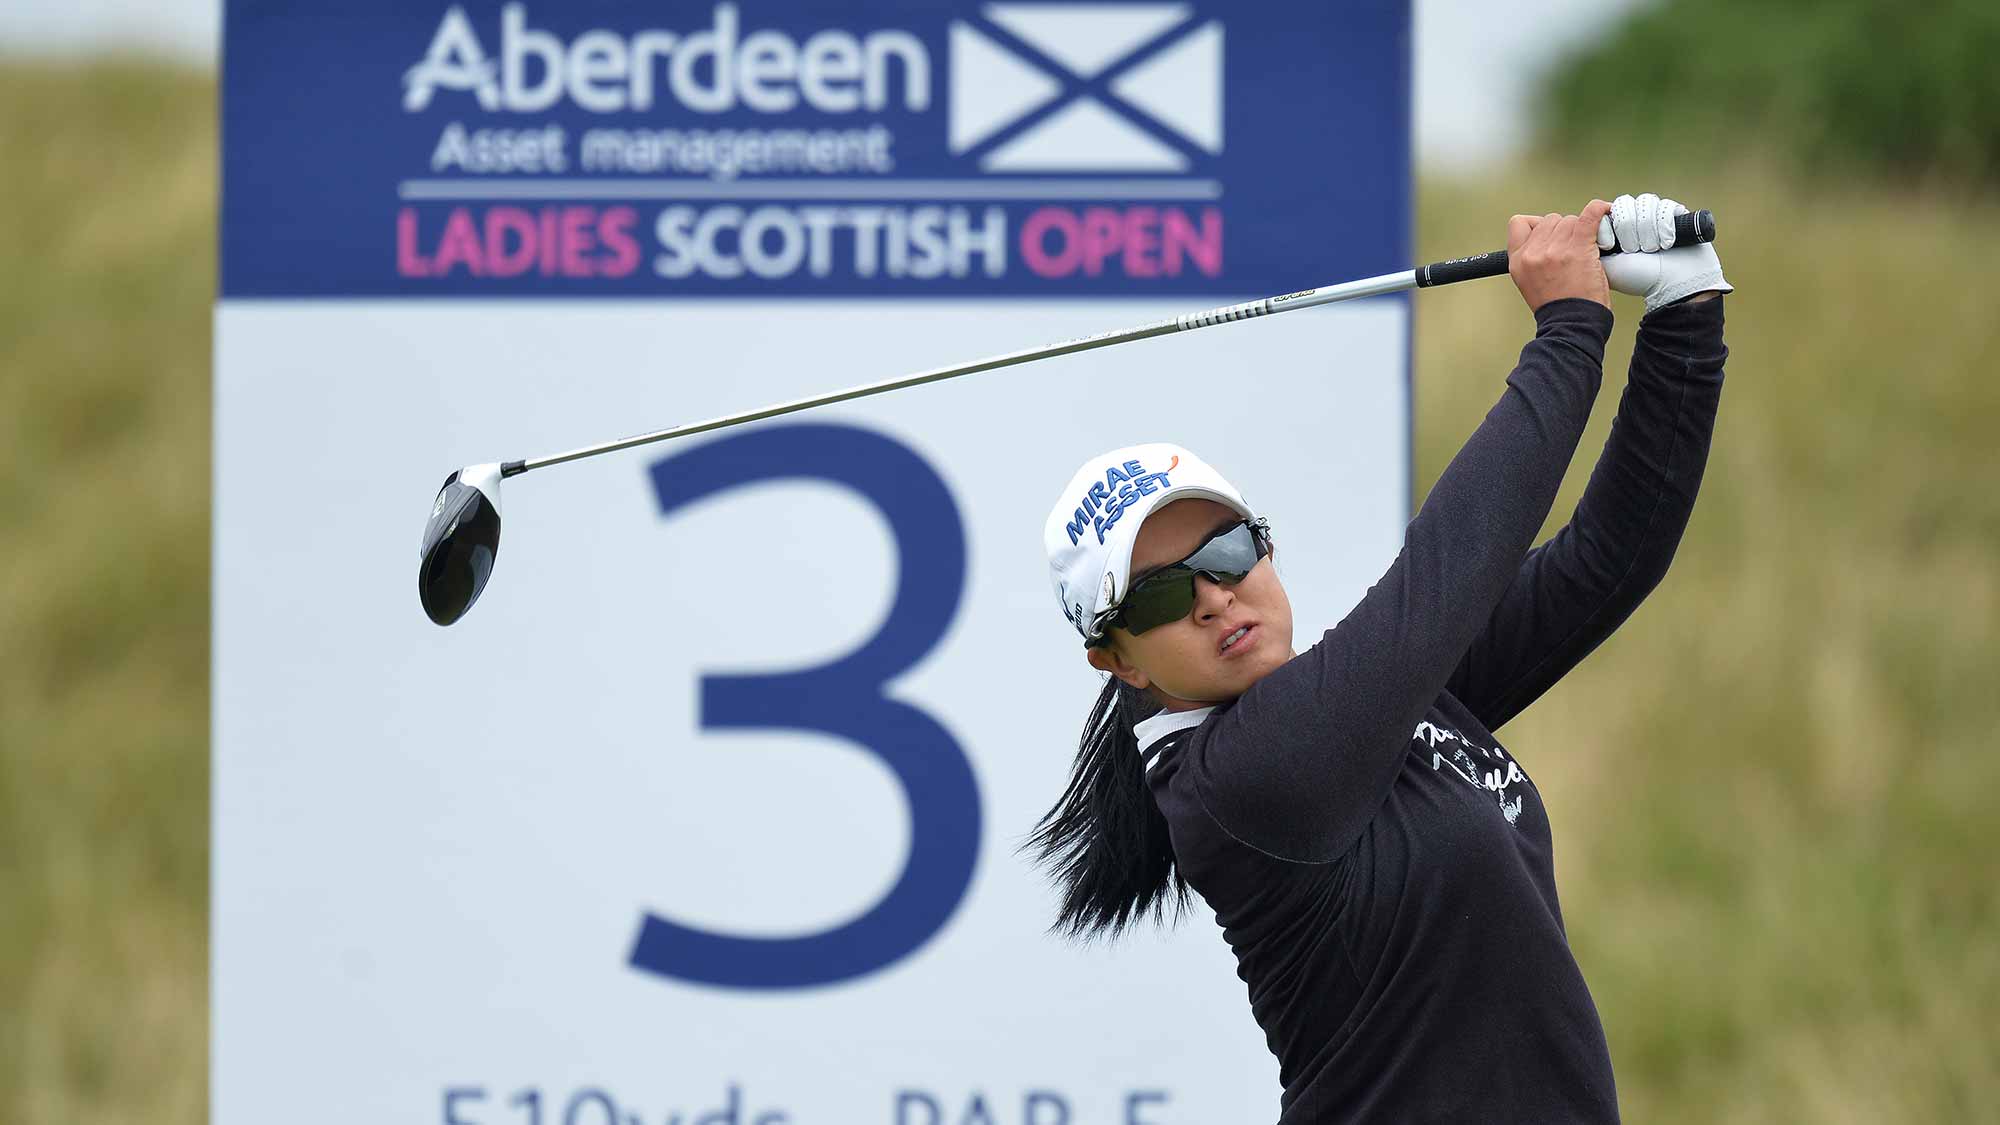 Sei Young Kim of Korea plays her tee shot at the 3rd hole during the third day of the Aberdeen Asset Management Ladies Scottish Open at Dundonald Links Golf Course